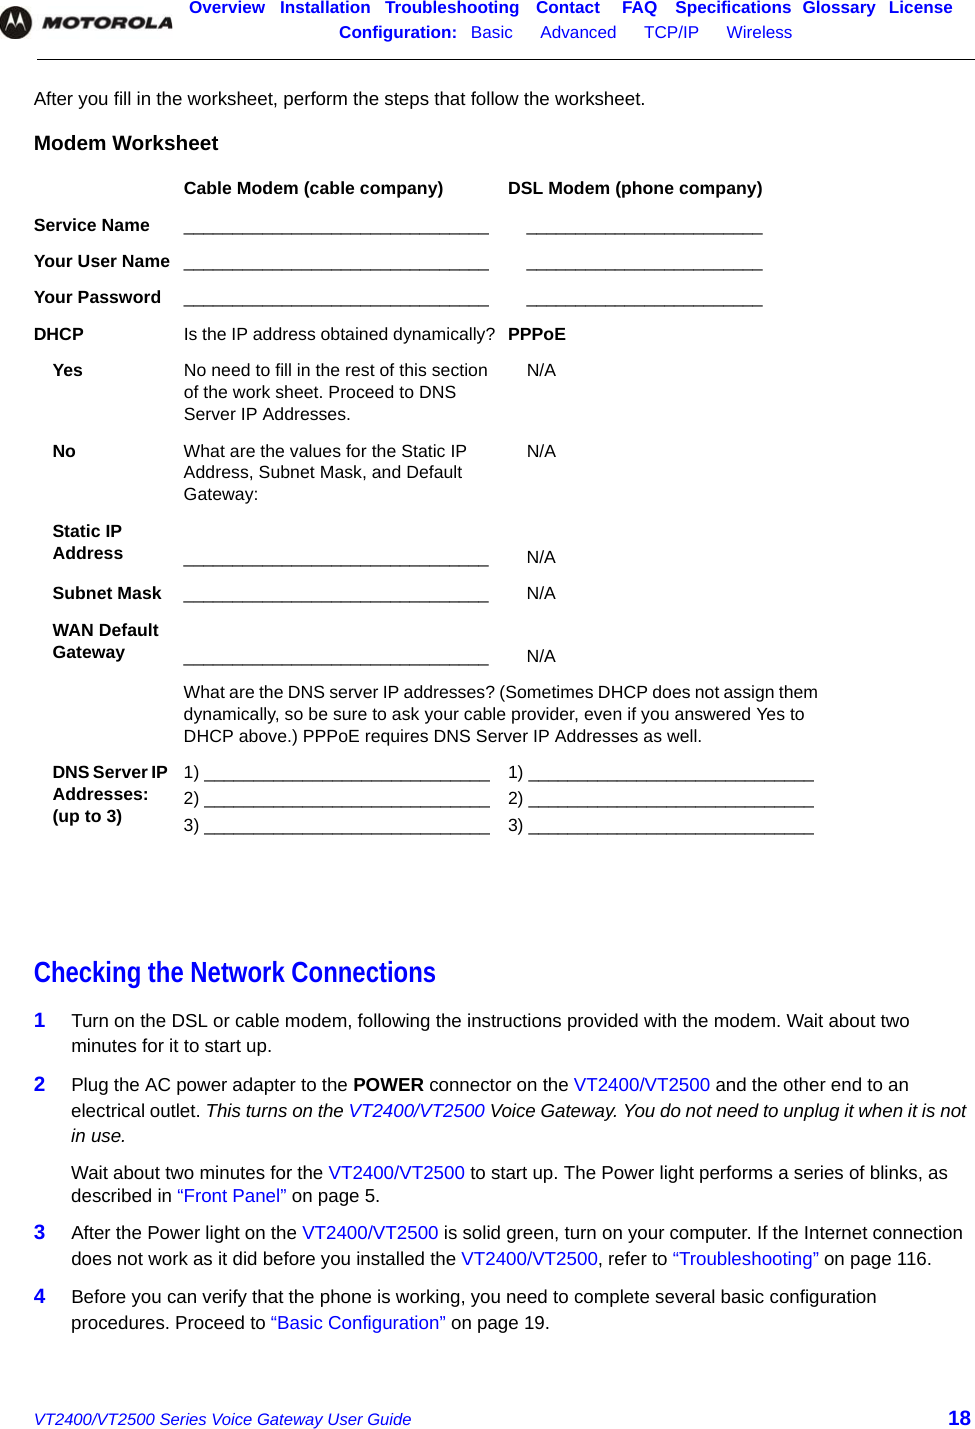 Overview Installation Troubleshooting Contact FAQ Specifications Glossary LicenseConfiguration:   Basic      Advanced      TCP/IP      Wireless    VT2400/VT2500 Series Voice Gateway User Guide 18After you fill in the worksheet, perform the steps that follow the worksheet.Checking the Network Connections1Turn on the DSL or cable modem, following the instructions provided with the modem. Wait about two minutes for it to start up.2Plug the AC power adapter to the POWER connector on the VT2400/VT2500 and the other end to an electrical outlet. This turns on the VT2400/VT2500 Voice Gateway. You do not need to unplug it when it is not in use. Wait about two minutes for the VT2400/VT2500 to start up. The Power light performs a series of blinks, as described in “Front Panel” on page 5.3After the Power light on the VT2400/VT2500 is solid green, turn on your computer. If the Internet connection does not work as it did before you installed the VT2400/VT2500, refer to “Troubleshooting” on page 116.4Before you can verify that the phone is working, you need to complete several basic configuration procedures. Proceed to “Basic Configuration” on page 19.Modem WorksheetCable Modem (cable company) DSL Modem (phone company)Service Name _______________________________ ________________________Your User Name _______________________________ ________________________Your Password _______________________________ ________________________DHCP  Is the IP address obtained dynamically? PPPoE Yes No need to fill in the rest of this section of the work sheet. Proceed to DNS Server IP Addresses.N/ANo What are the values for the Static IP Address, Subnet Mask, and Default Gateway:N/AStatic IP Address _______________________________ N/ASubnet Mask _______________________________ N/AWAN Default Gateway _______________________________ N/AWhat are the DNS server IP addresses? (Sometimes DHCP does not assign them dynamically, so be sure to ask your cable provider, even if you answered Yes to DHCP above.) PPPoE requires DNS Server IP Addresses as well.DNS Server IP Addresses: (up to 3)1) _____________________________2) _____________________________3) _____________________________1) _____________________________2) _____________________________3) _____________________________